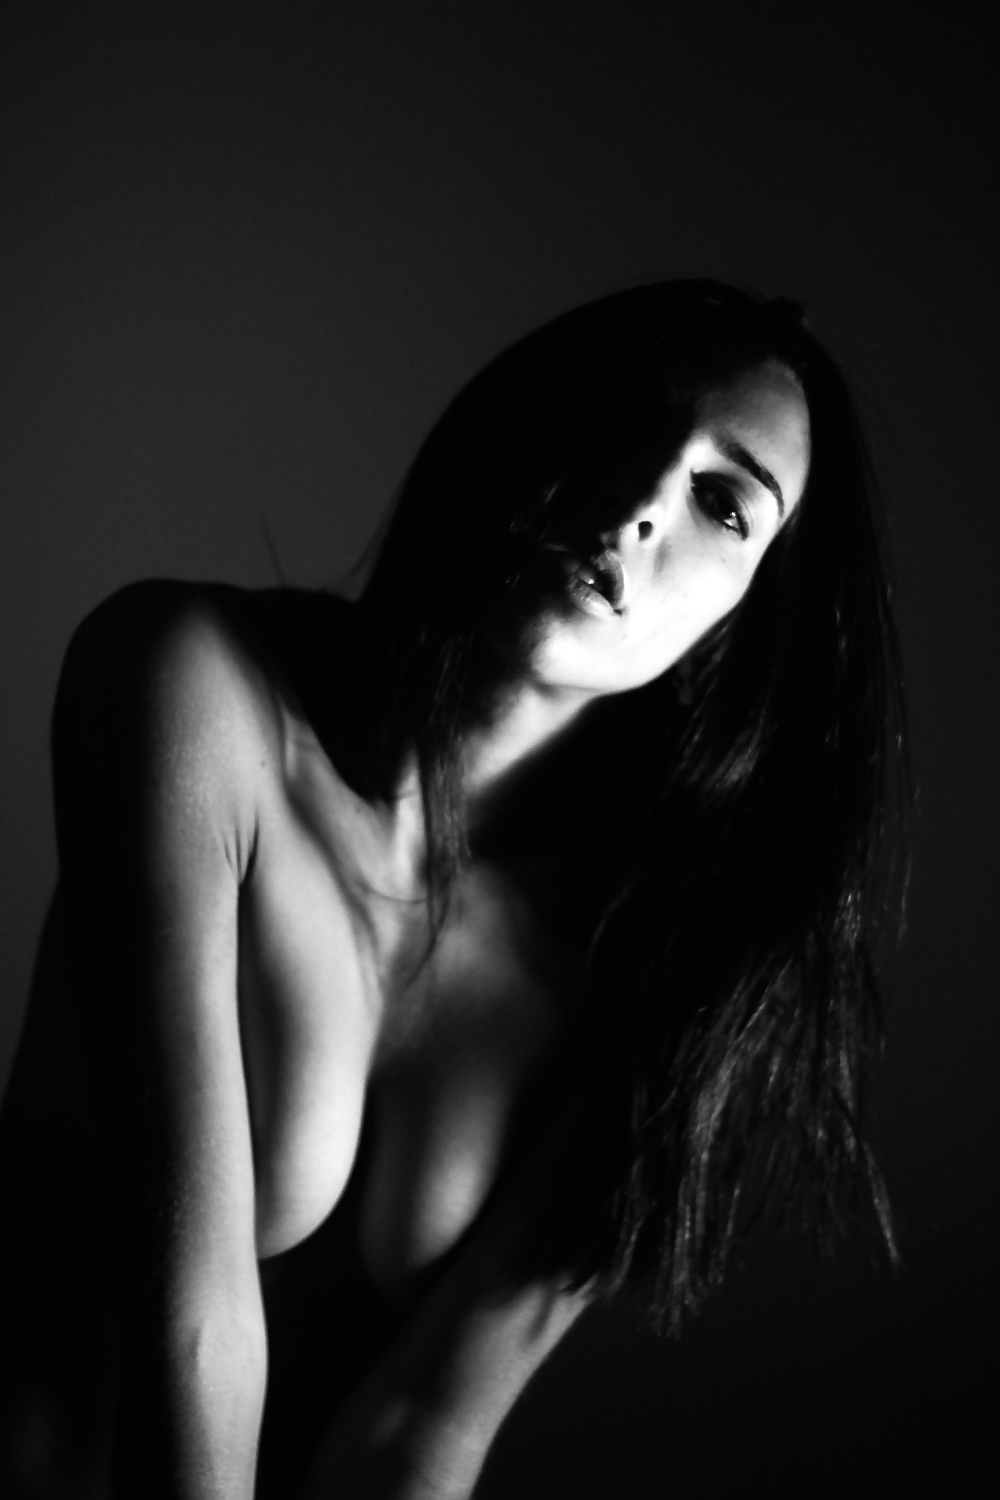 Quality Pictures Babes Art Black & White 8 #40284897